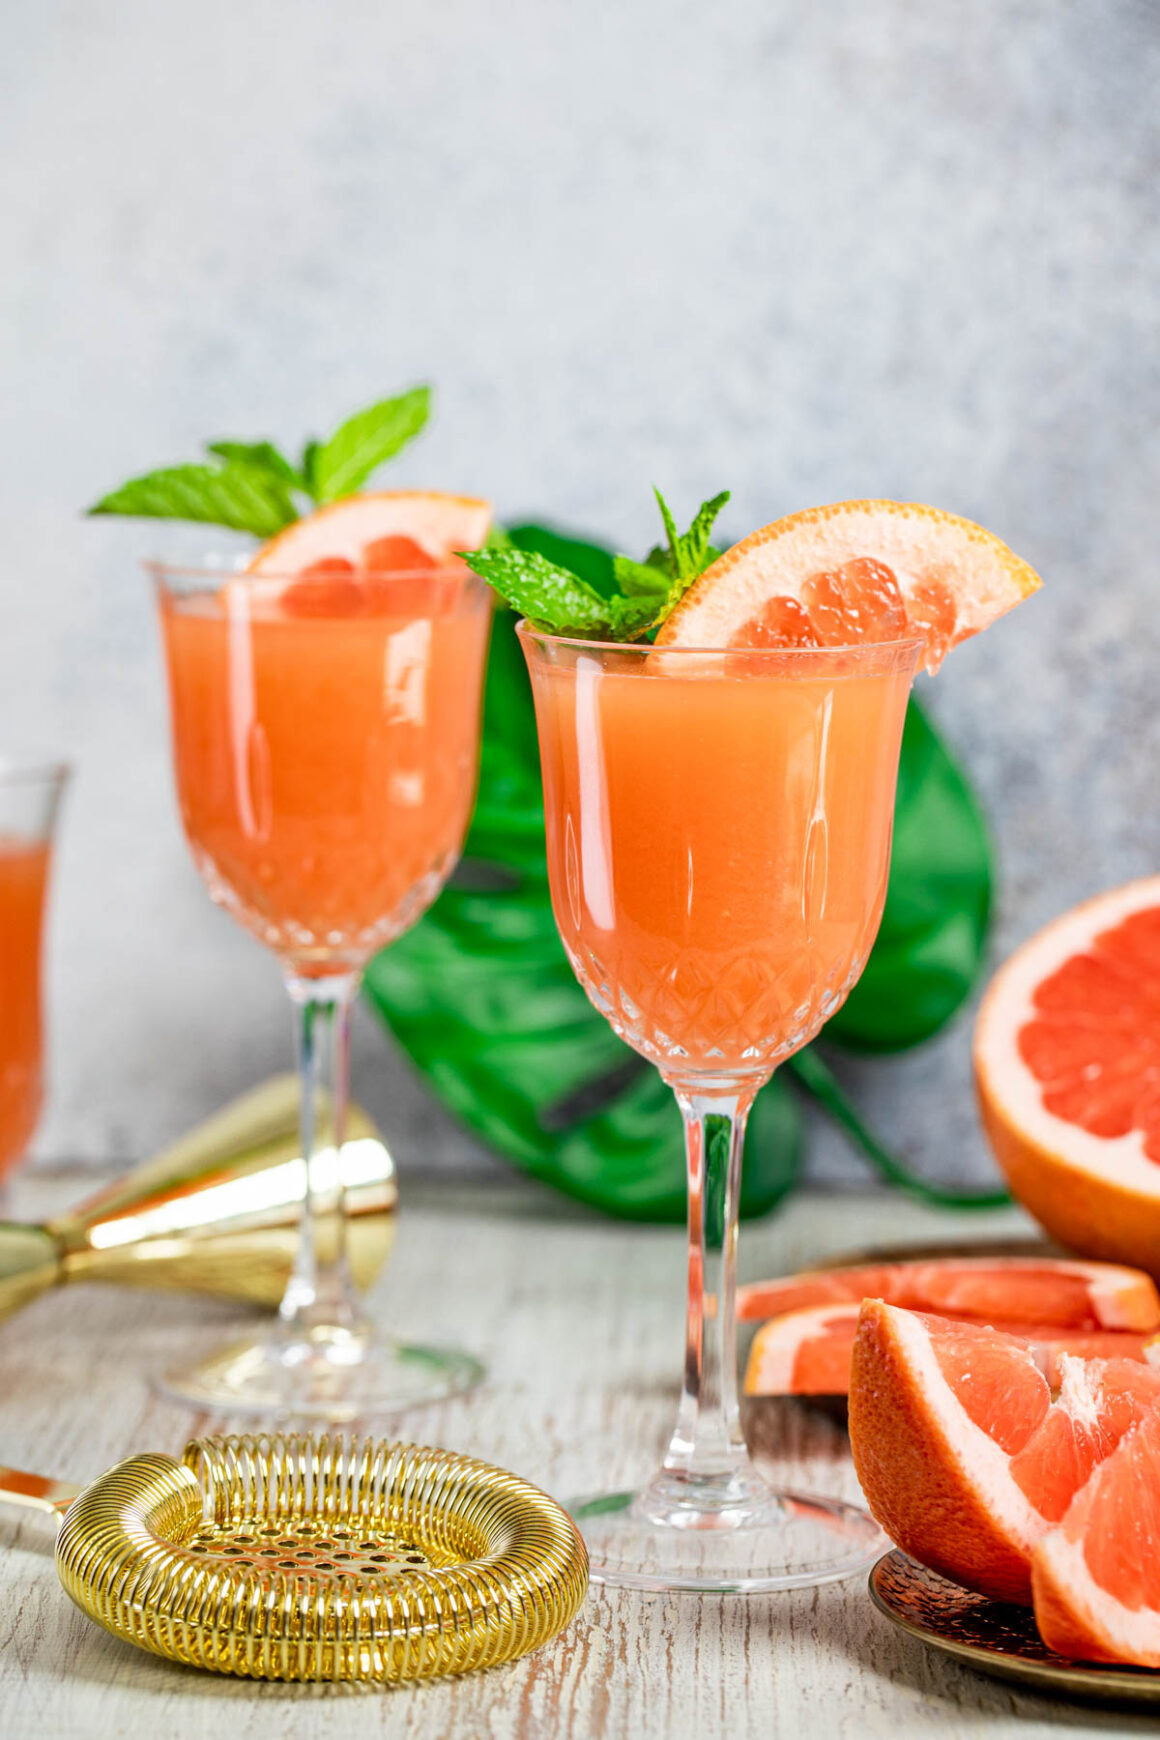 This well-balanced tart and sweet refreshing Grapefruit Martini have that flavor that can be enjoyed for this summer season!